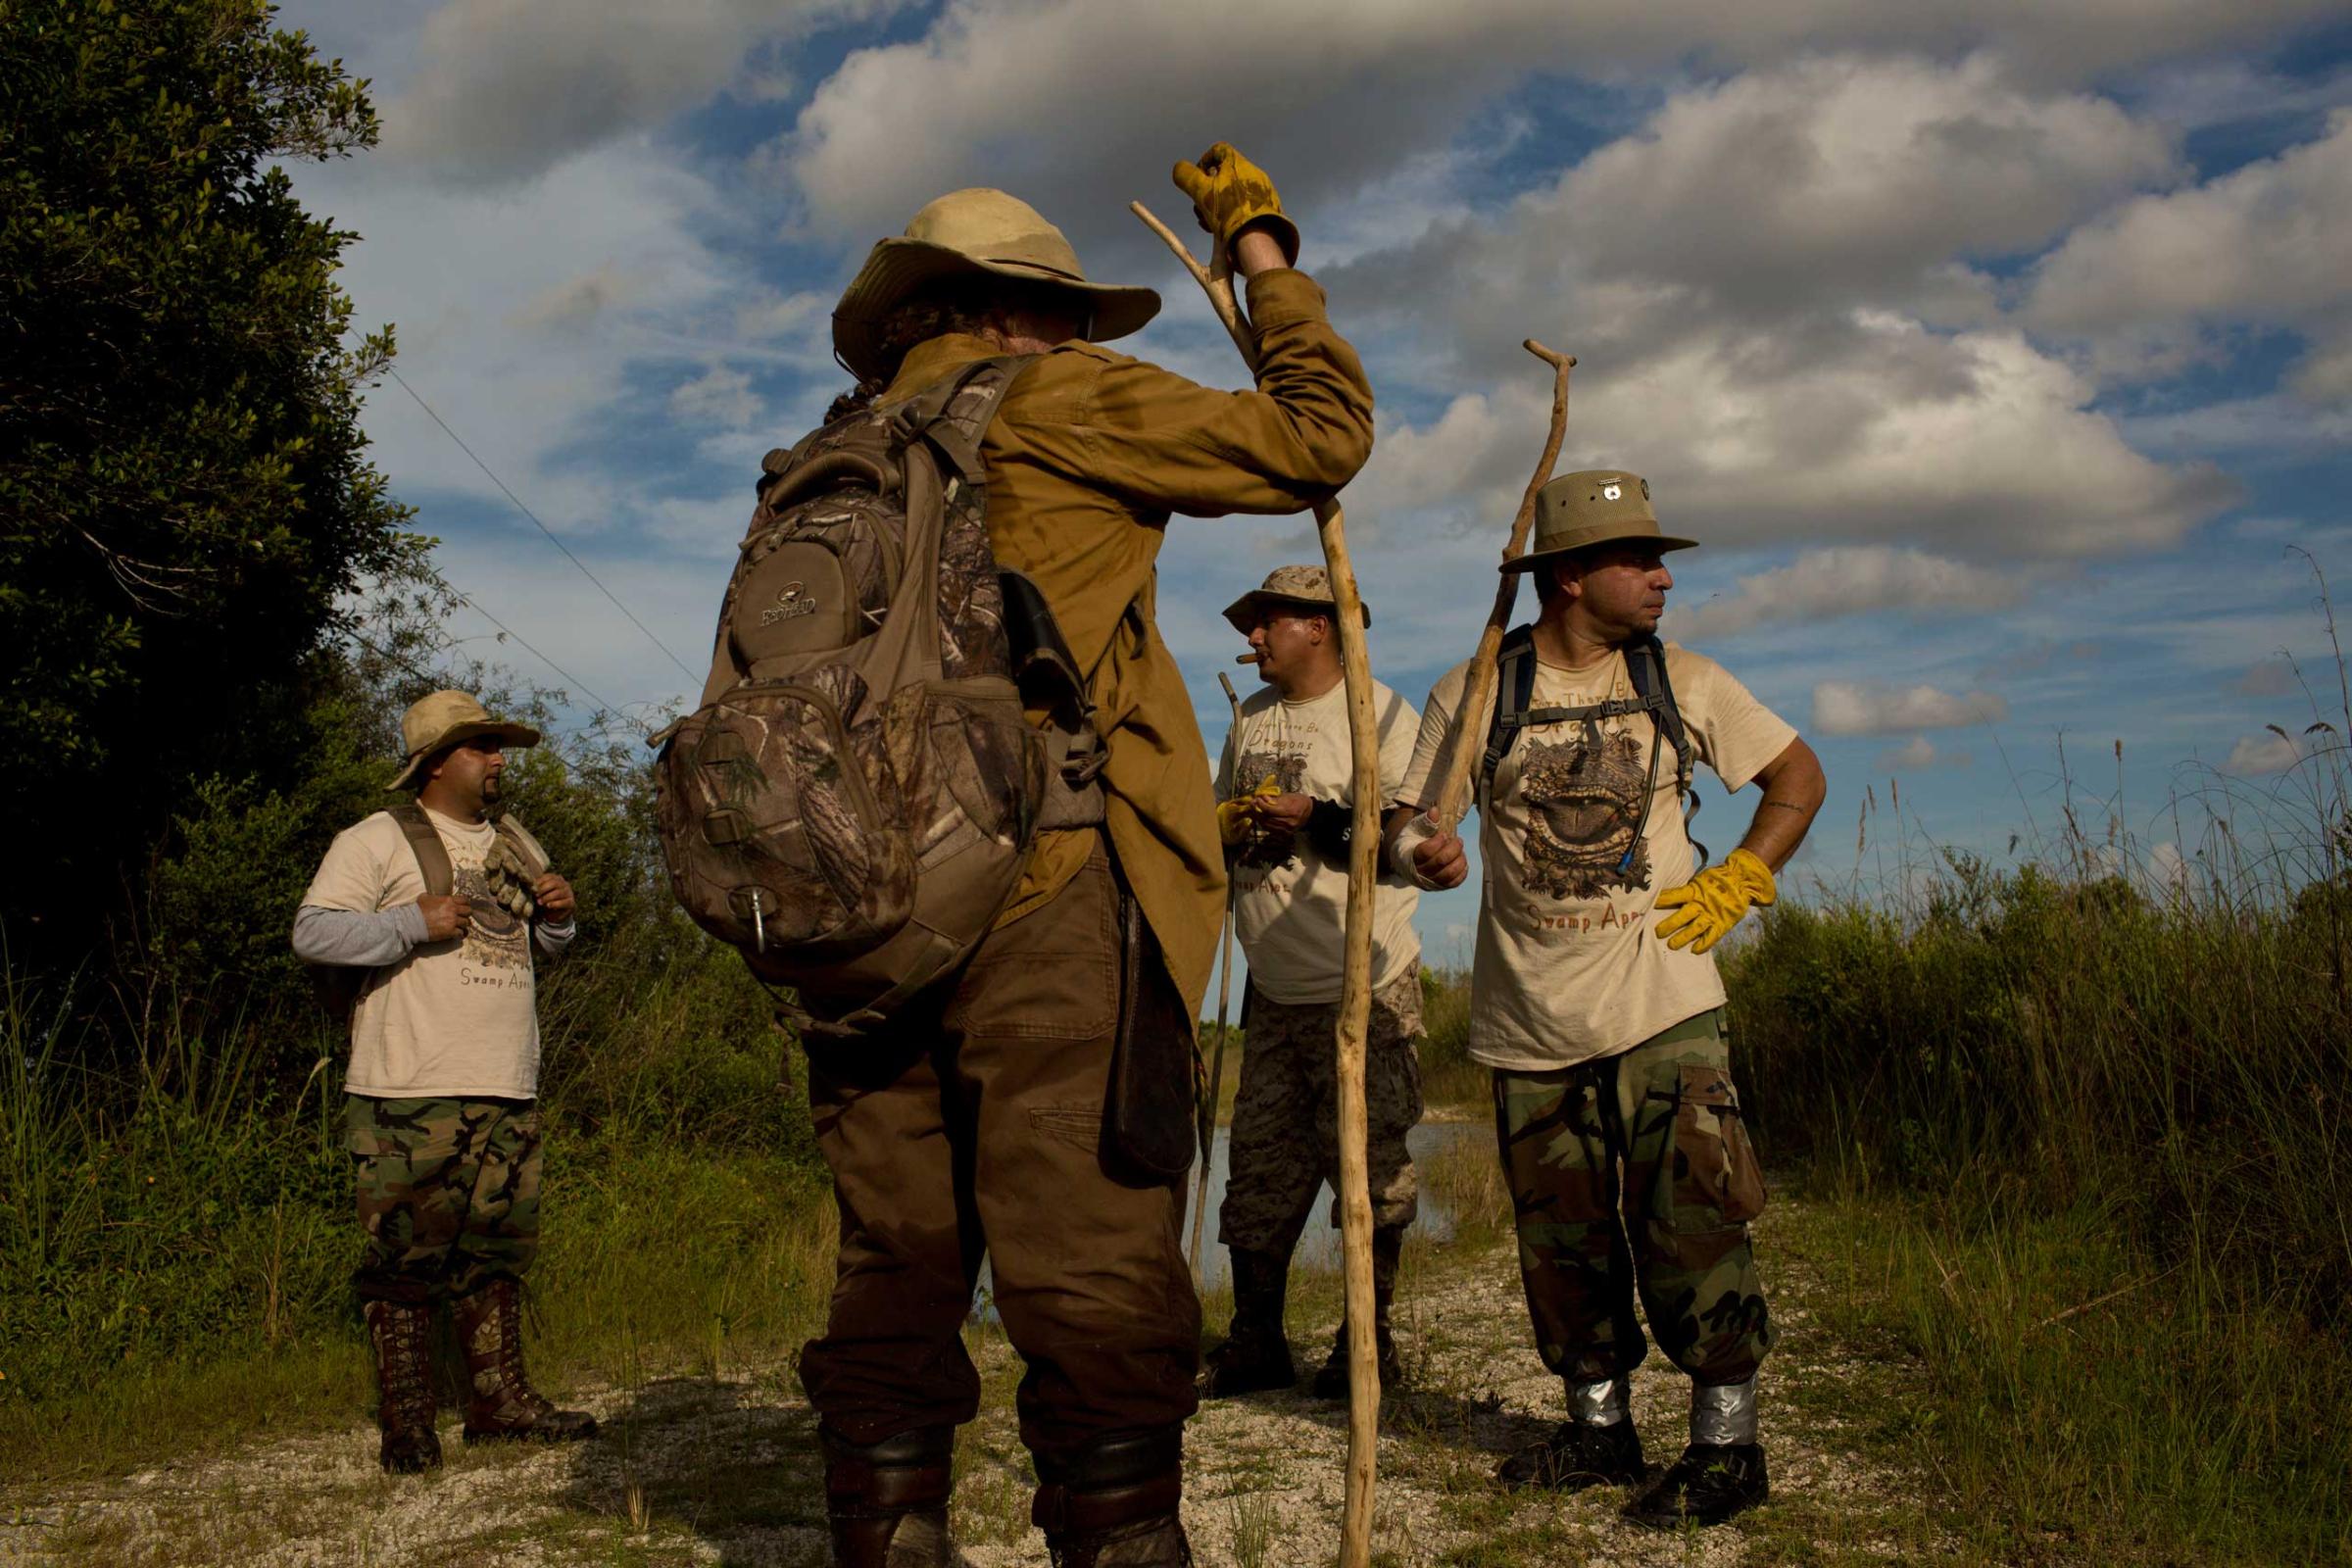 Founder of the "Swamp Apes" Tom Rahill speaks to veterans and volunteer members of the group during a patrol through Florida's Everglades National Park searching for invasive pythons in the Chekika area of the park on Saturday Oct. 4, 2014. From left to right are Jorge Martinez, Rahill, Jose Rodriguez, and Alex Nunez. (David Guttenfelder for TIME)